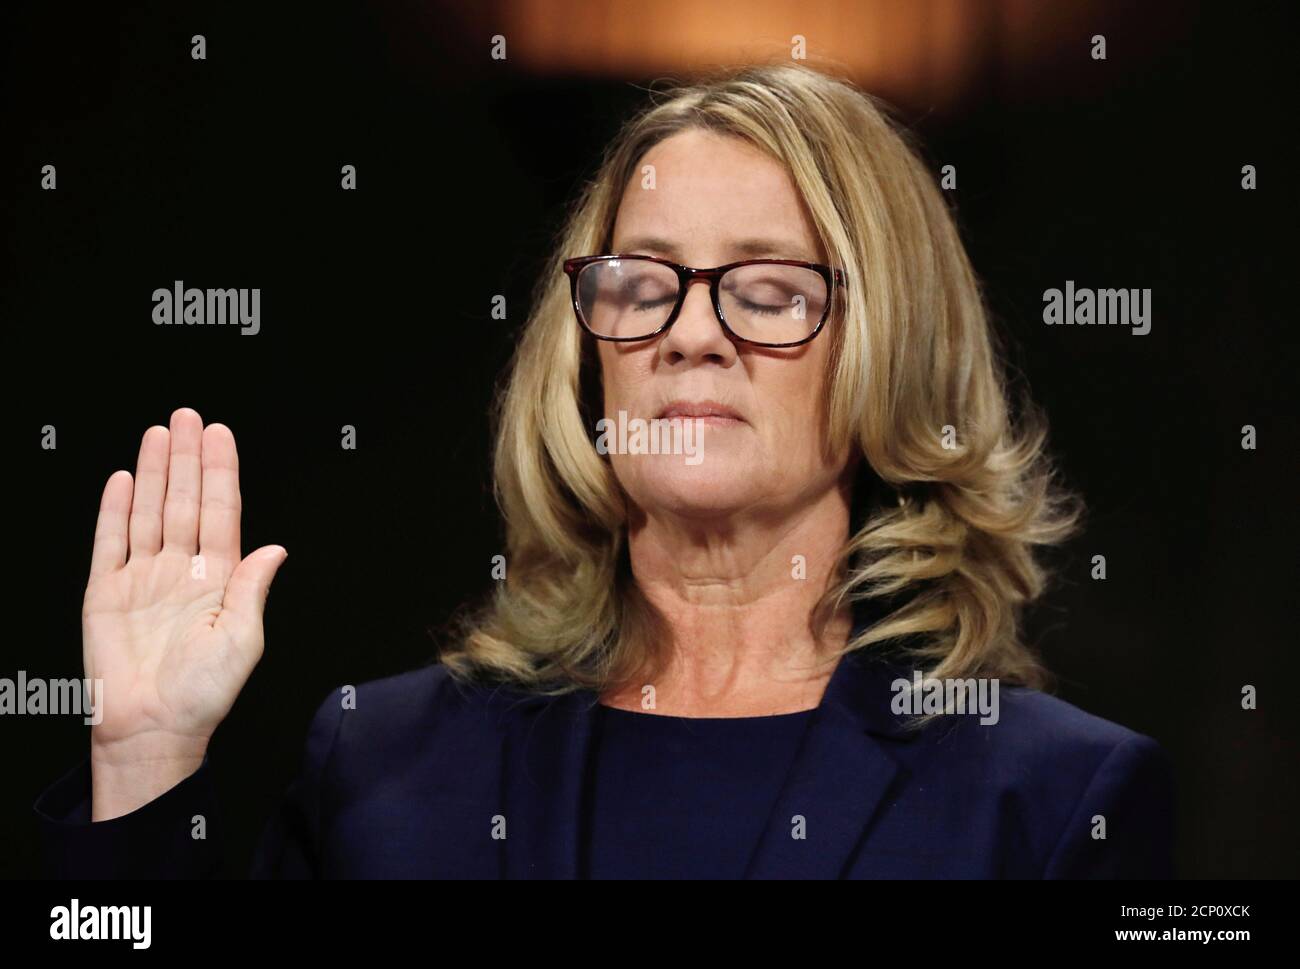 Christine Blasey Ford closes her eyes as she is sworn in before testifying to the Senate Judiciary Committee confirmation hearing for President Donald Trump's Supreme Court nominee Judge Brett Kavanaugh on Capitol Hill in Washington, U.S., September 27, 2018. Reuters photographer Jim Bourg: 'The moment looks peaceful as if Christine Blasey Ford had closed her eyes in thought, but the image actually reflects the fact that in the nine seconds that she had her hand up to be sworn in to testify, she blinked several times. Blasey Ford began her testimony by saying: 'I am here today not because I wa Stock Photo